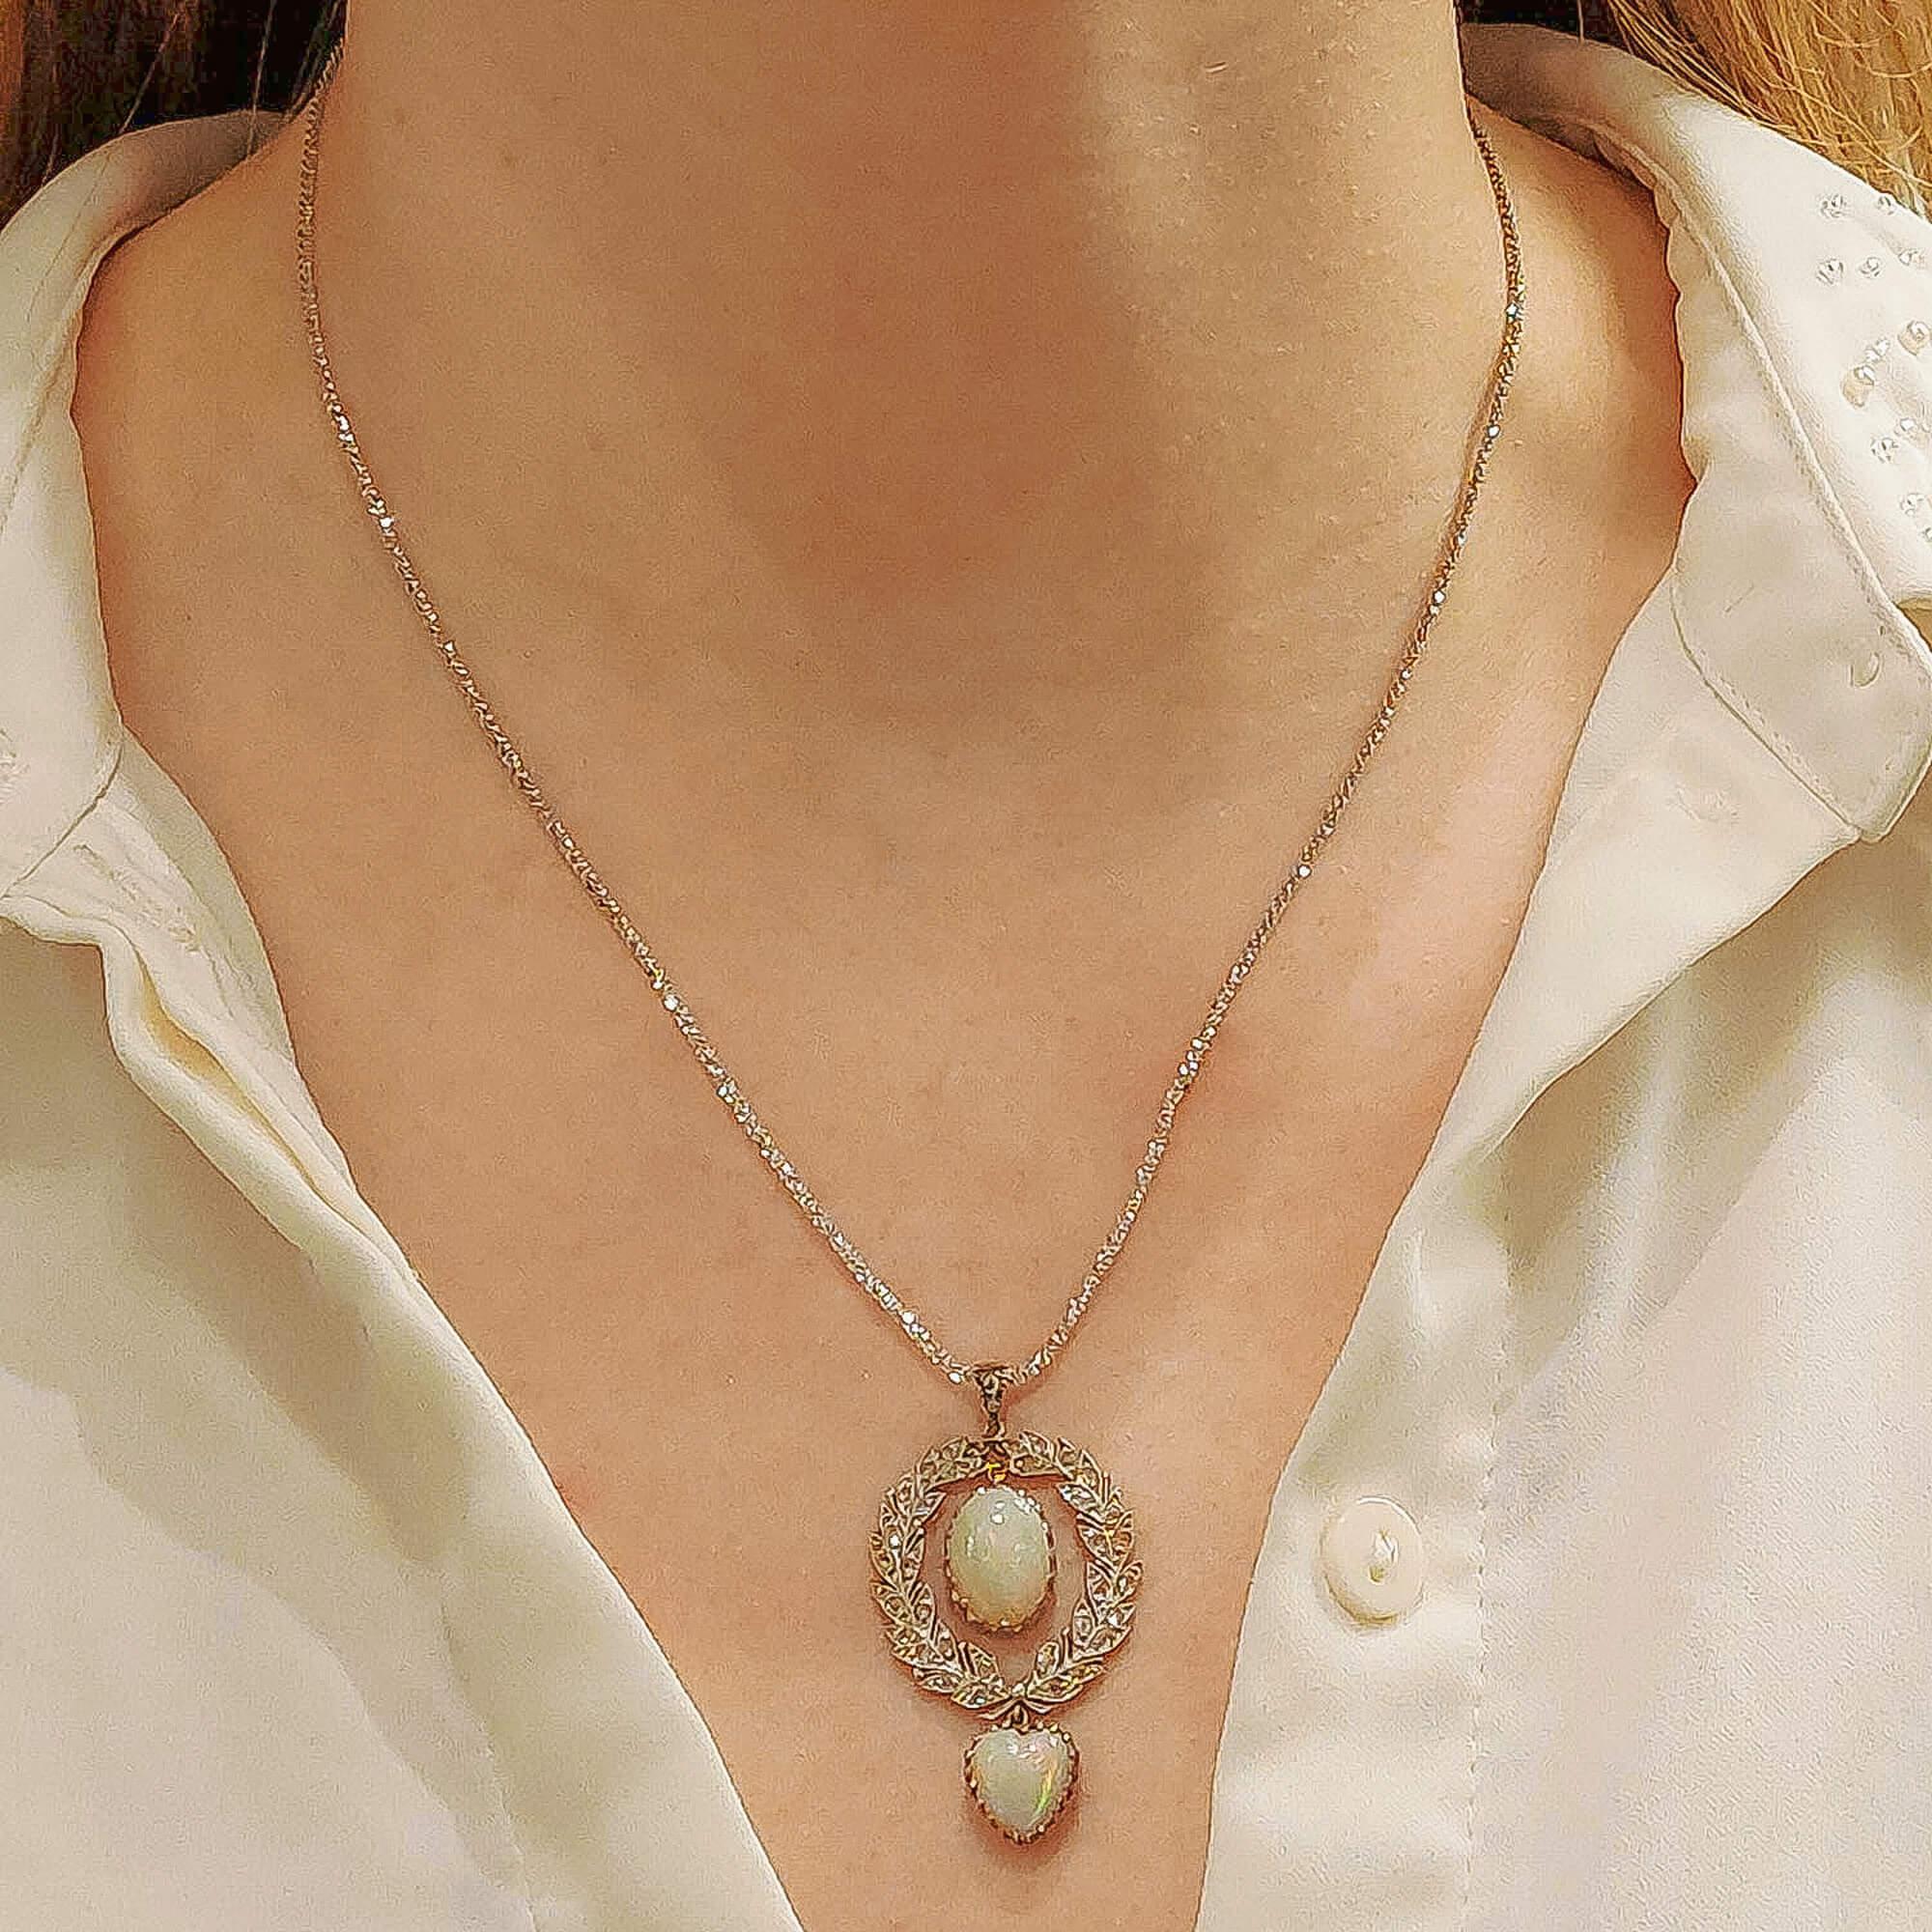 A Belle Epoque opal and diamond pendant in platinum and gold, featuring an oval cabochon white opal claw-set on a platinum open-back scalloped collet, suspended from a rose-cut diamond-set platinum wreath that surrounds it, atop a similarly-set